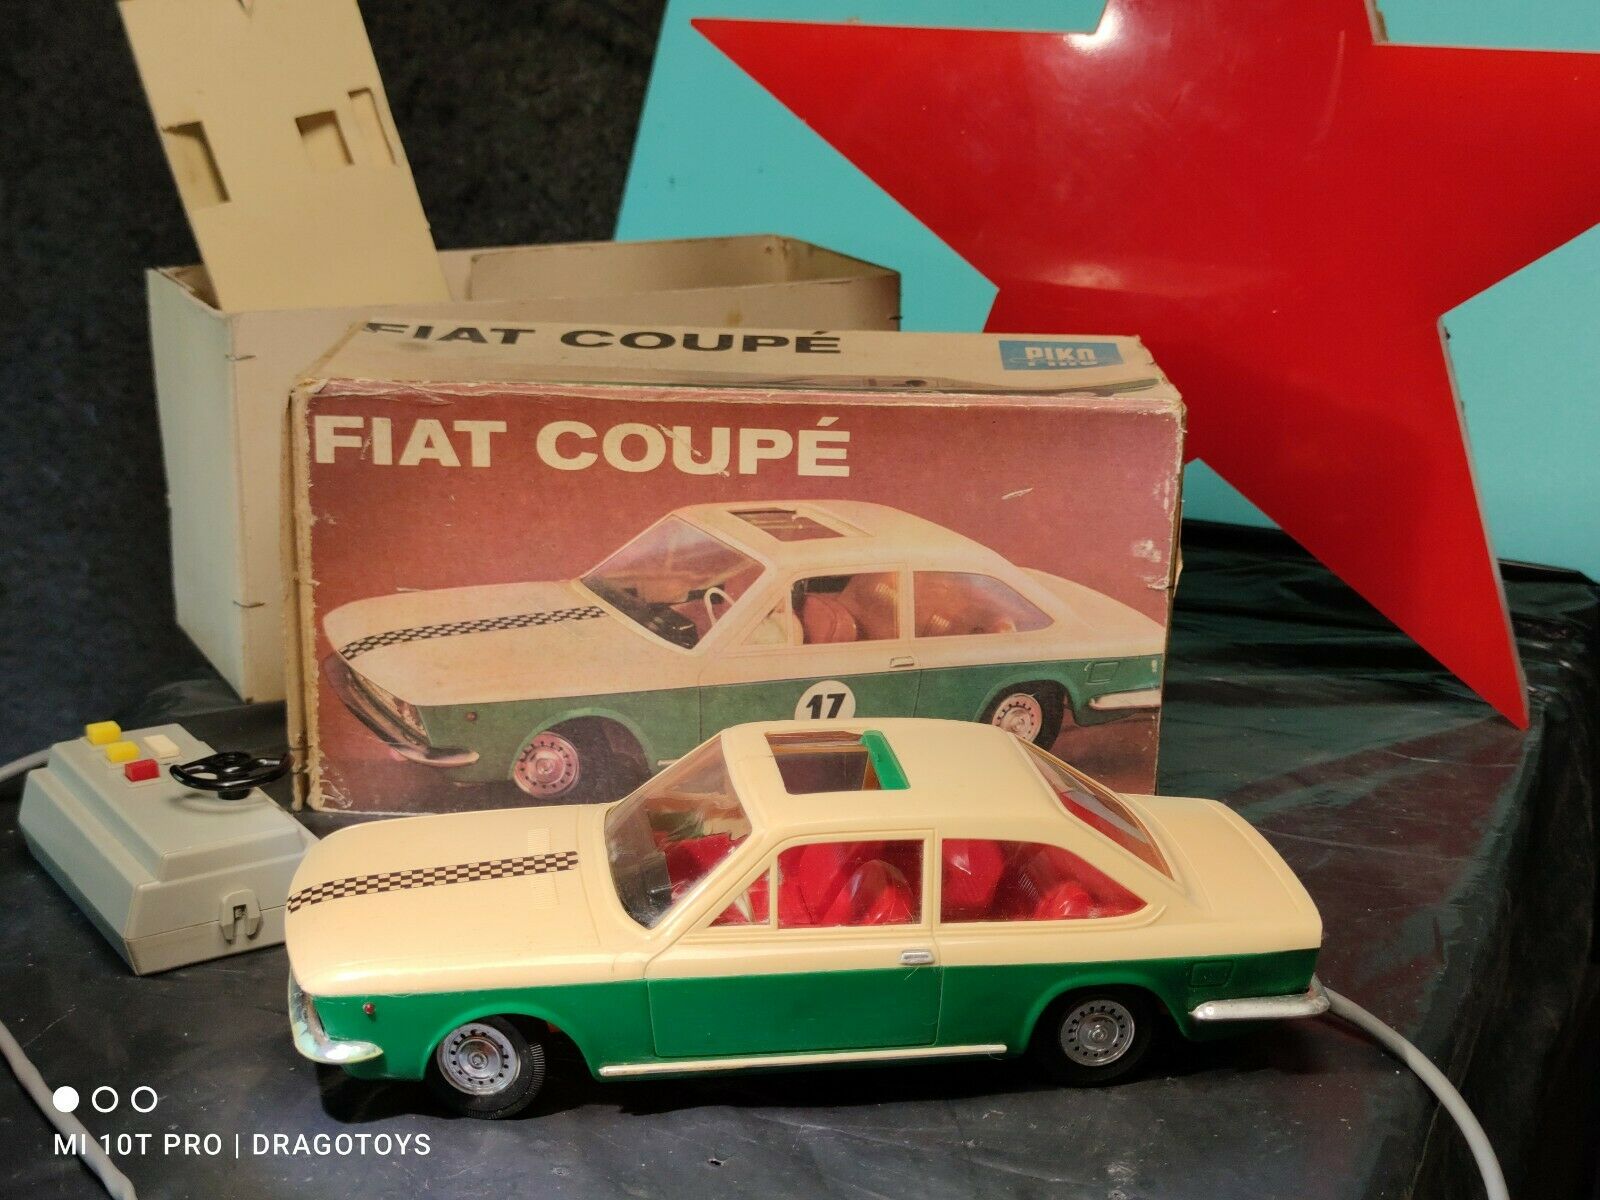 Vintage Fiat 124 Coupe Toy Car Germany Piko Anker Batt. Operated Remote In Box